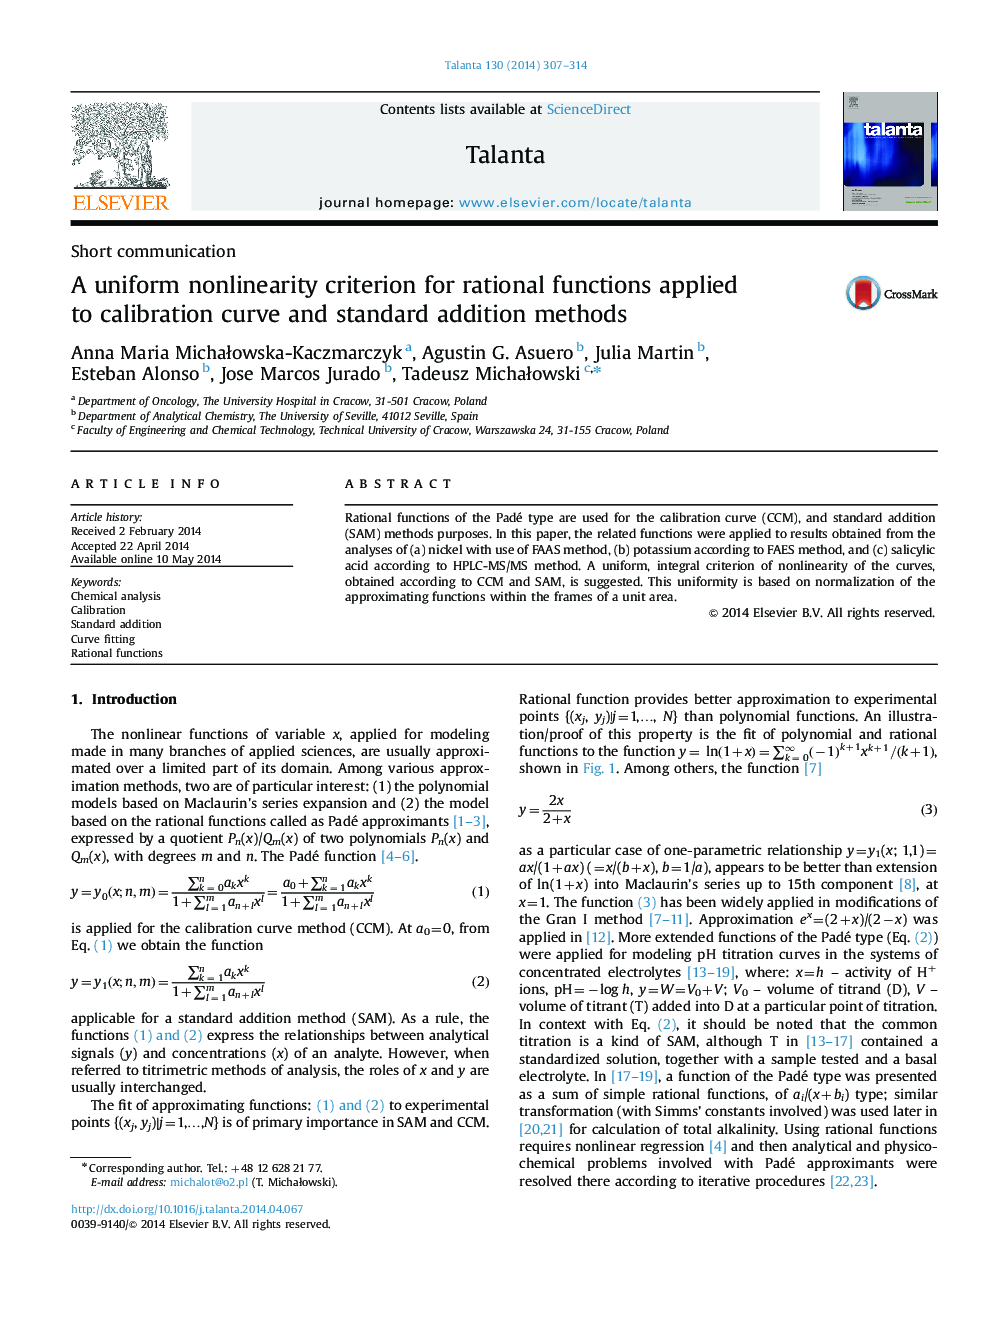 A uniform nonlinearity criterion for rational functions applied to calibration curve and standard addition methods